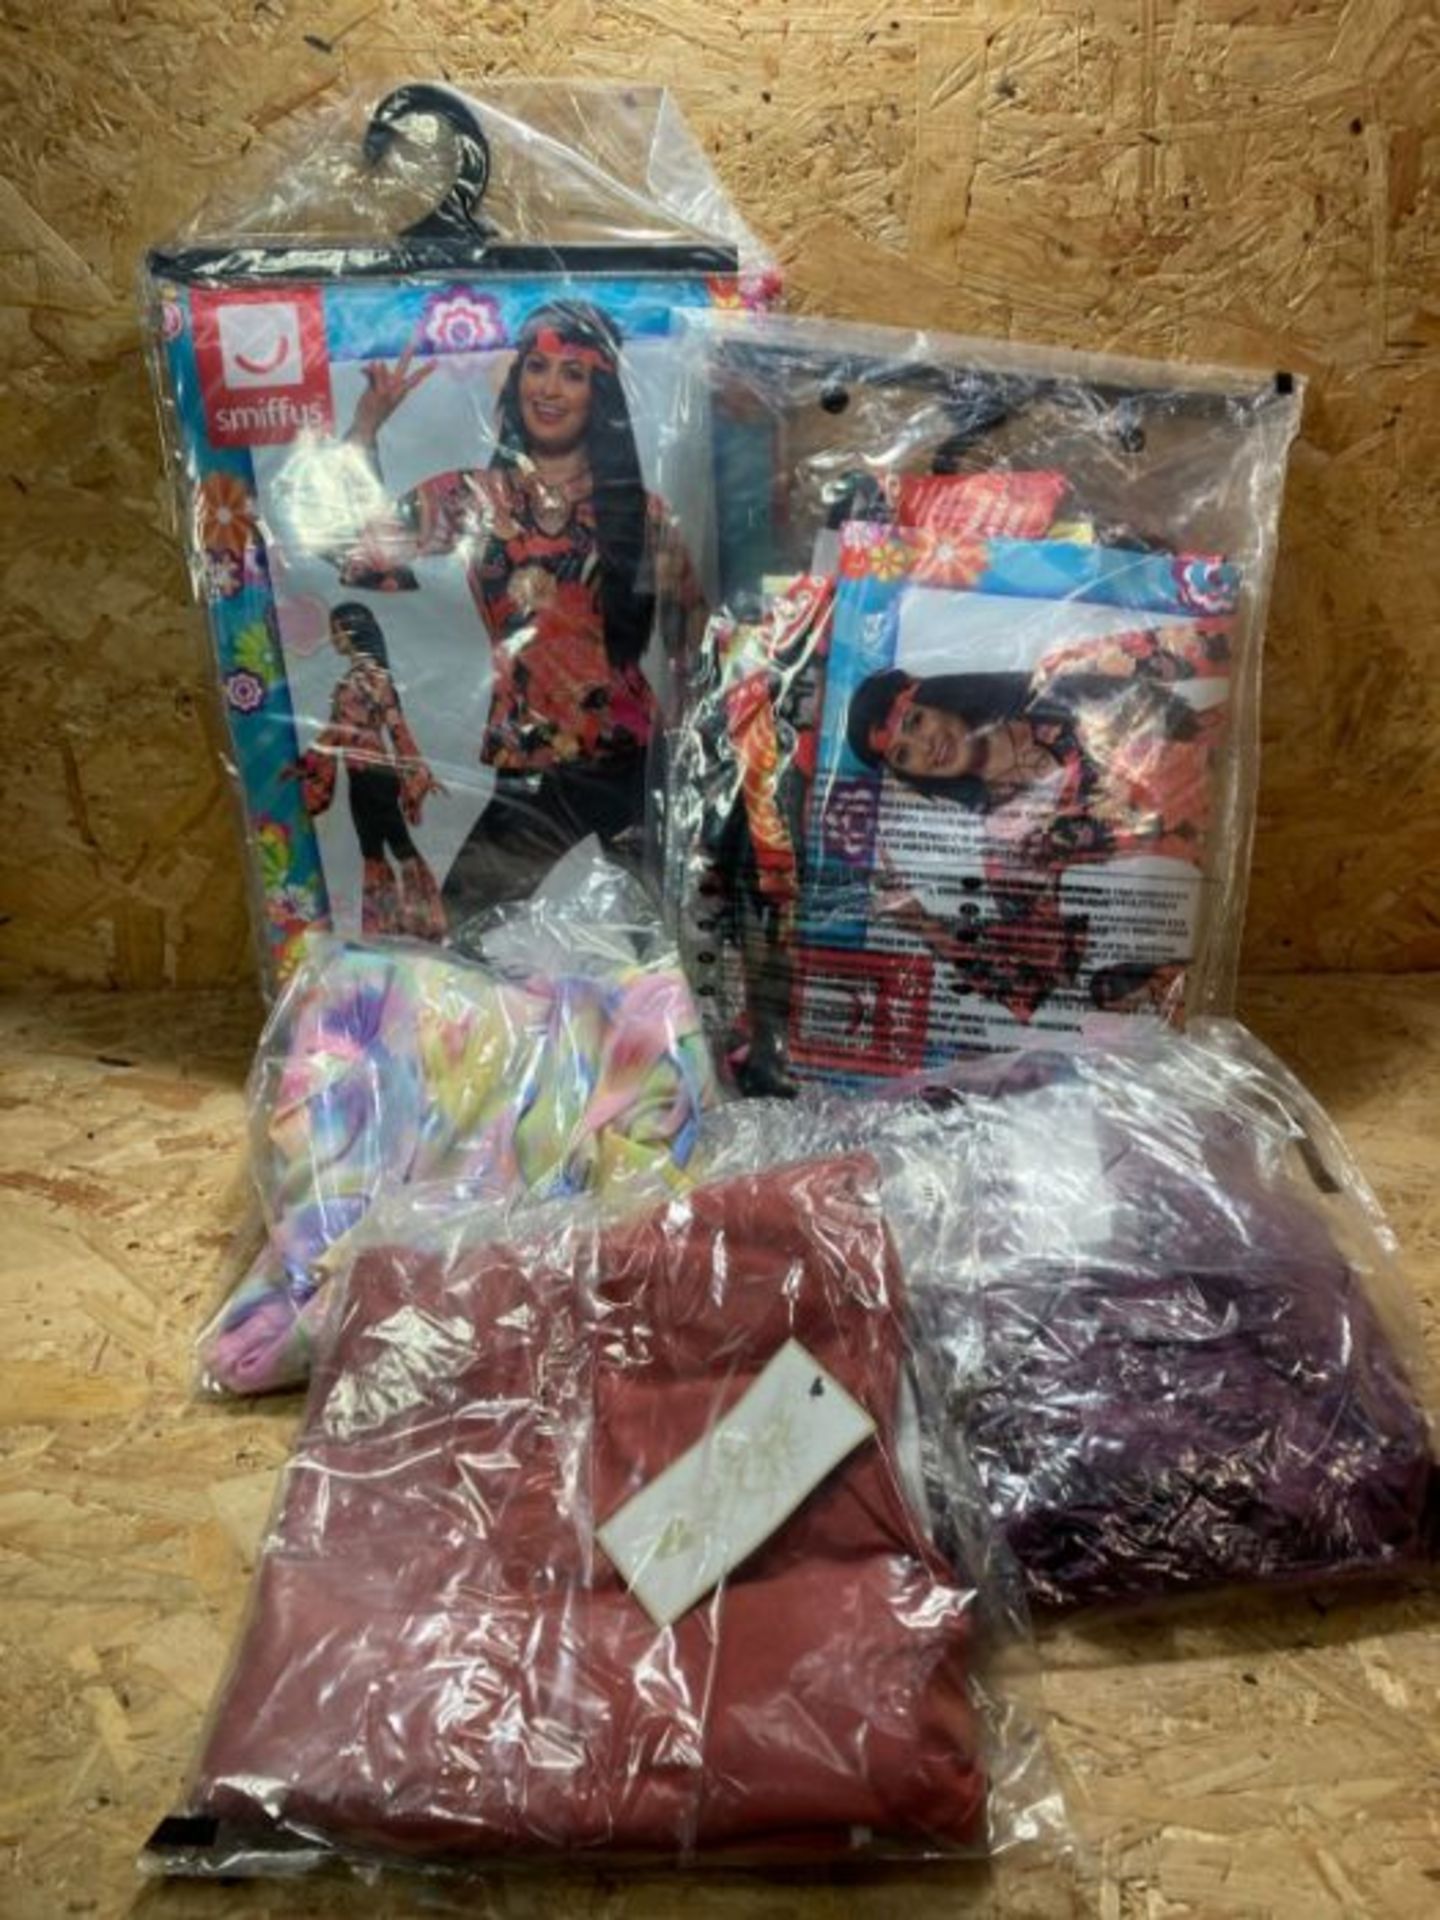 5 X ASSORTED ITEMS OF CLOTHING / INCLUDES COSTUMES AND OTHER WOMEN'S CLOTHING / CUSTOMER RETURNS.